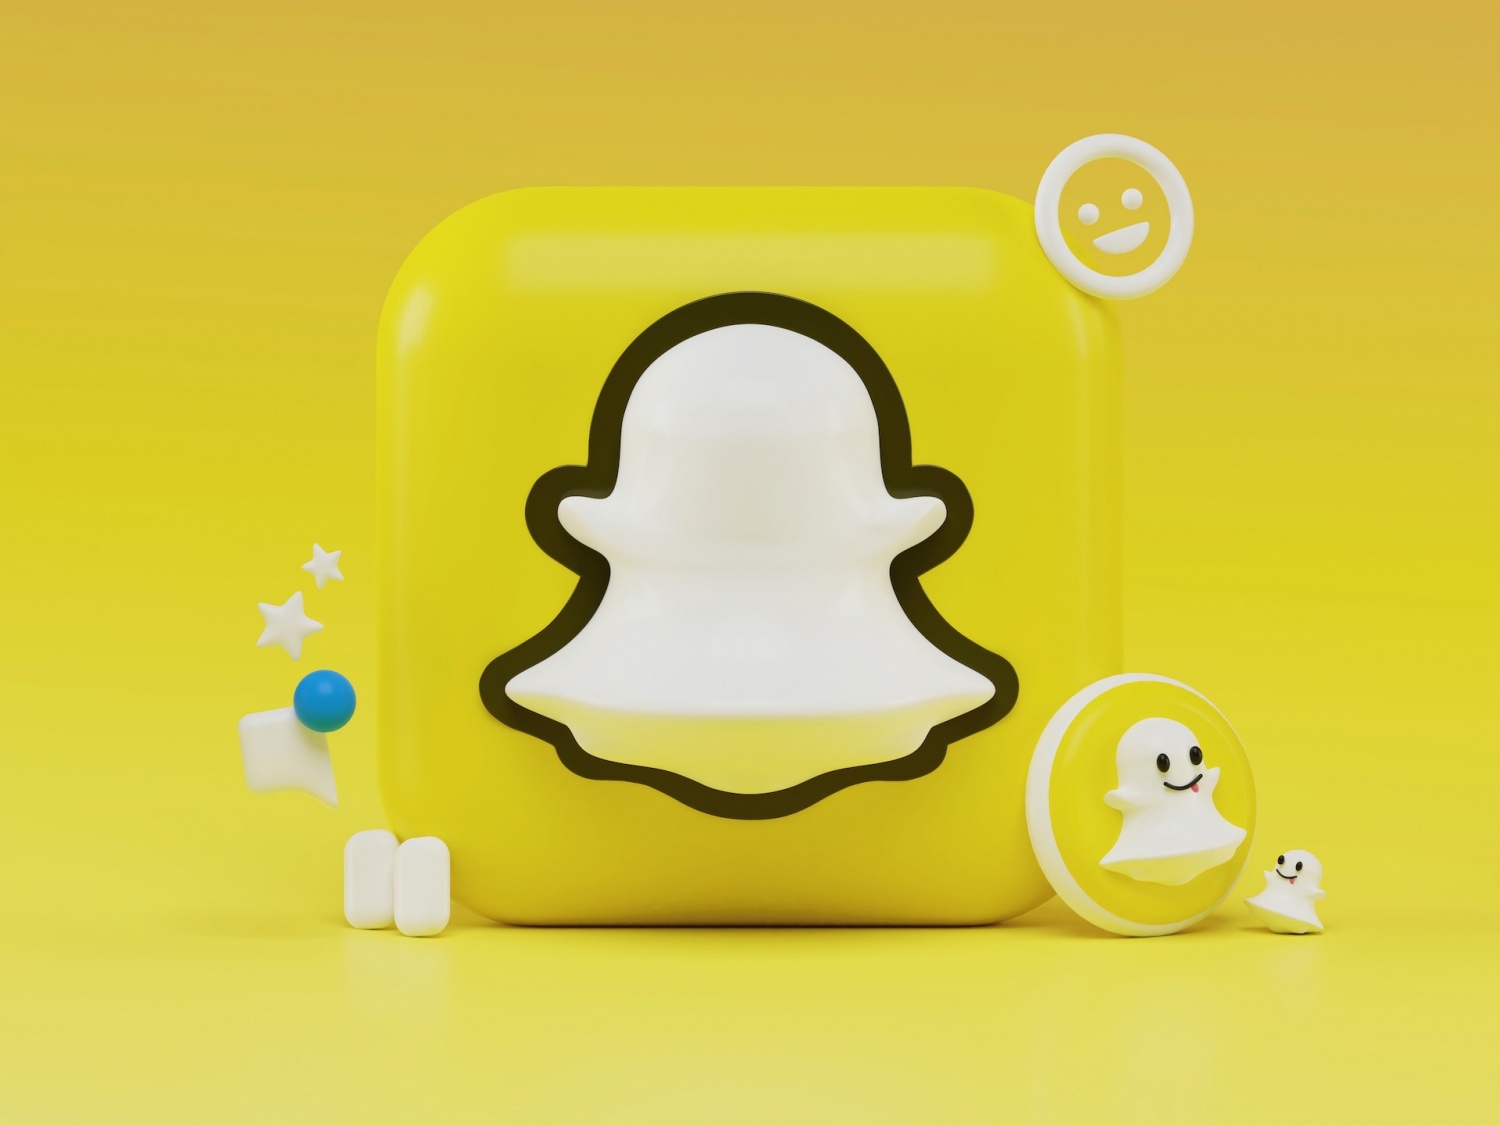 Snapchat Plus Users Have New Premium Features to Explore Right Now